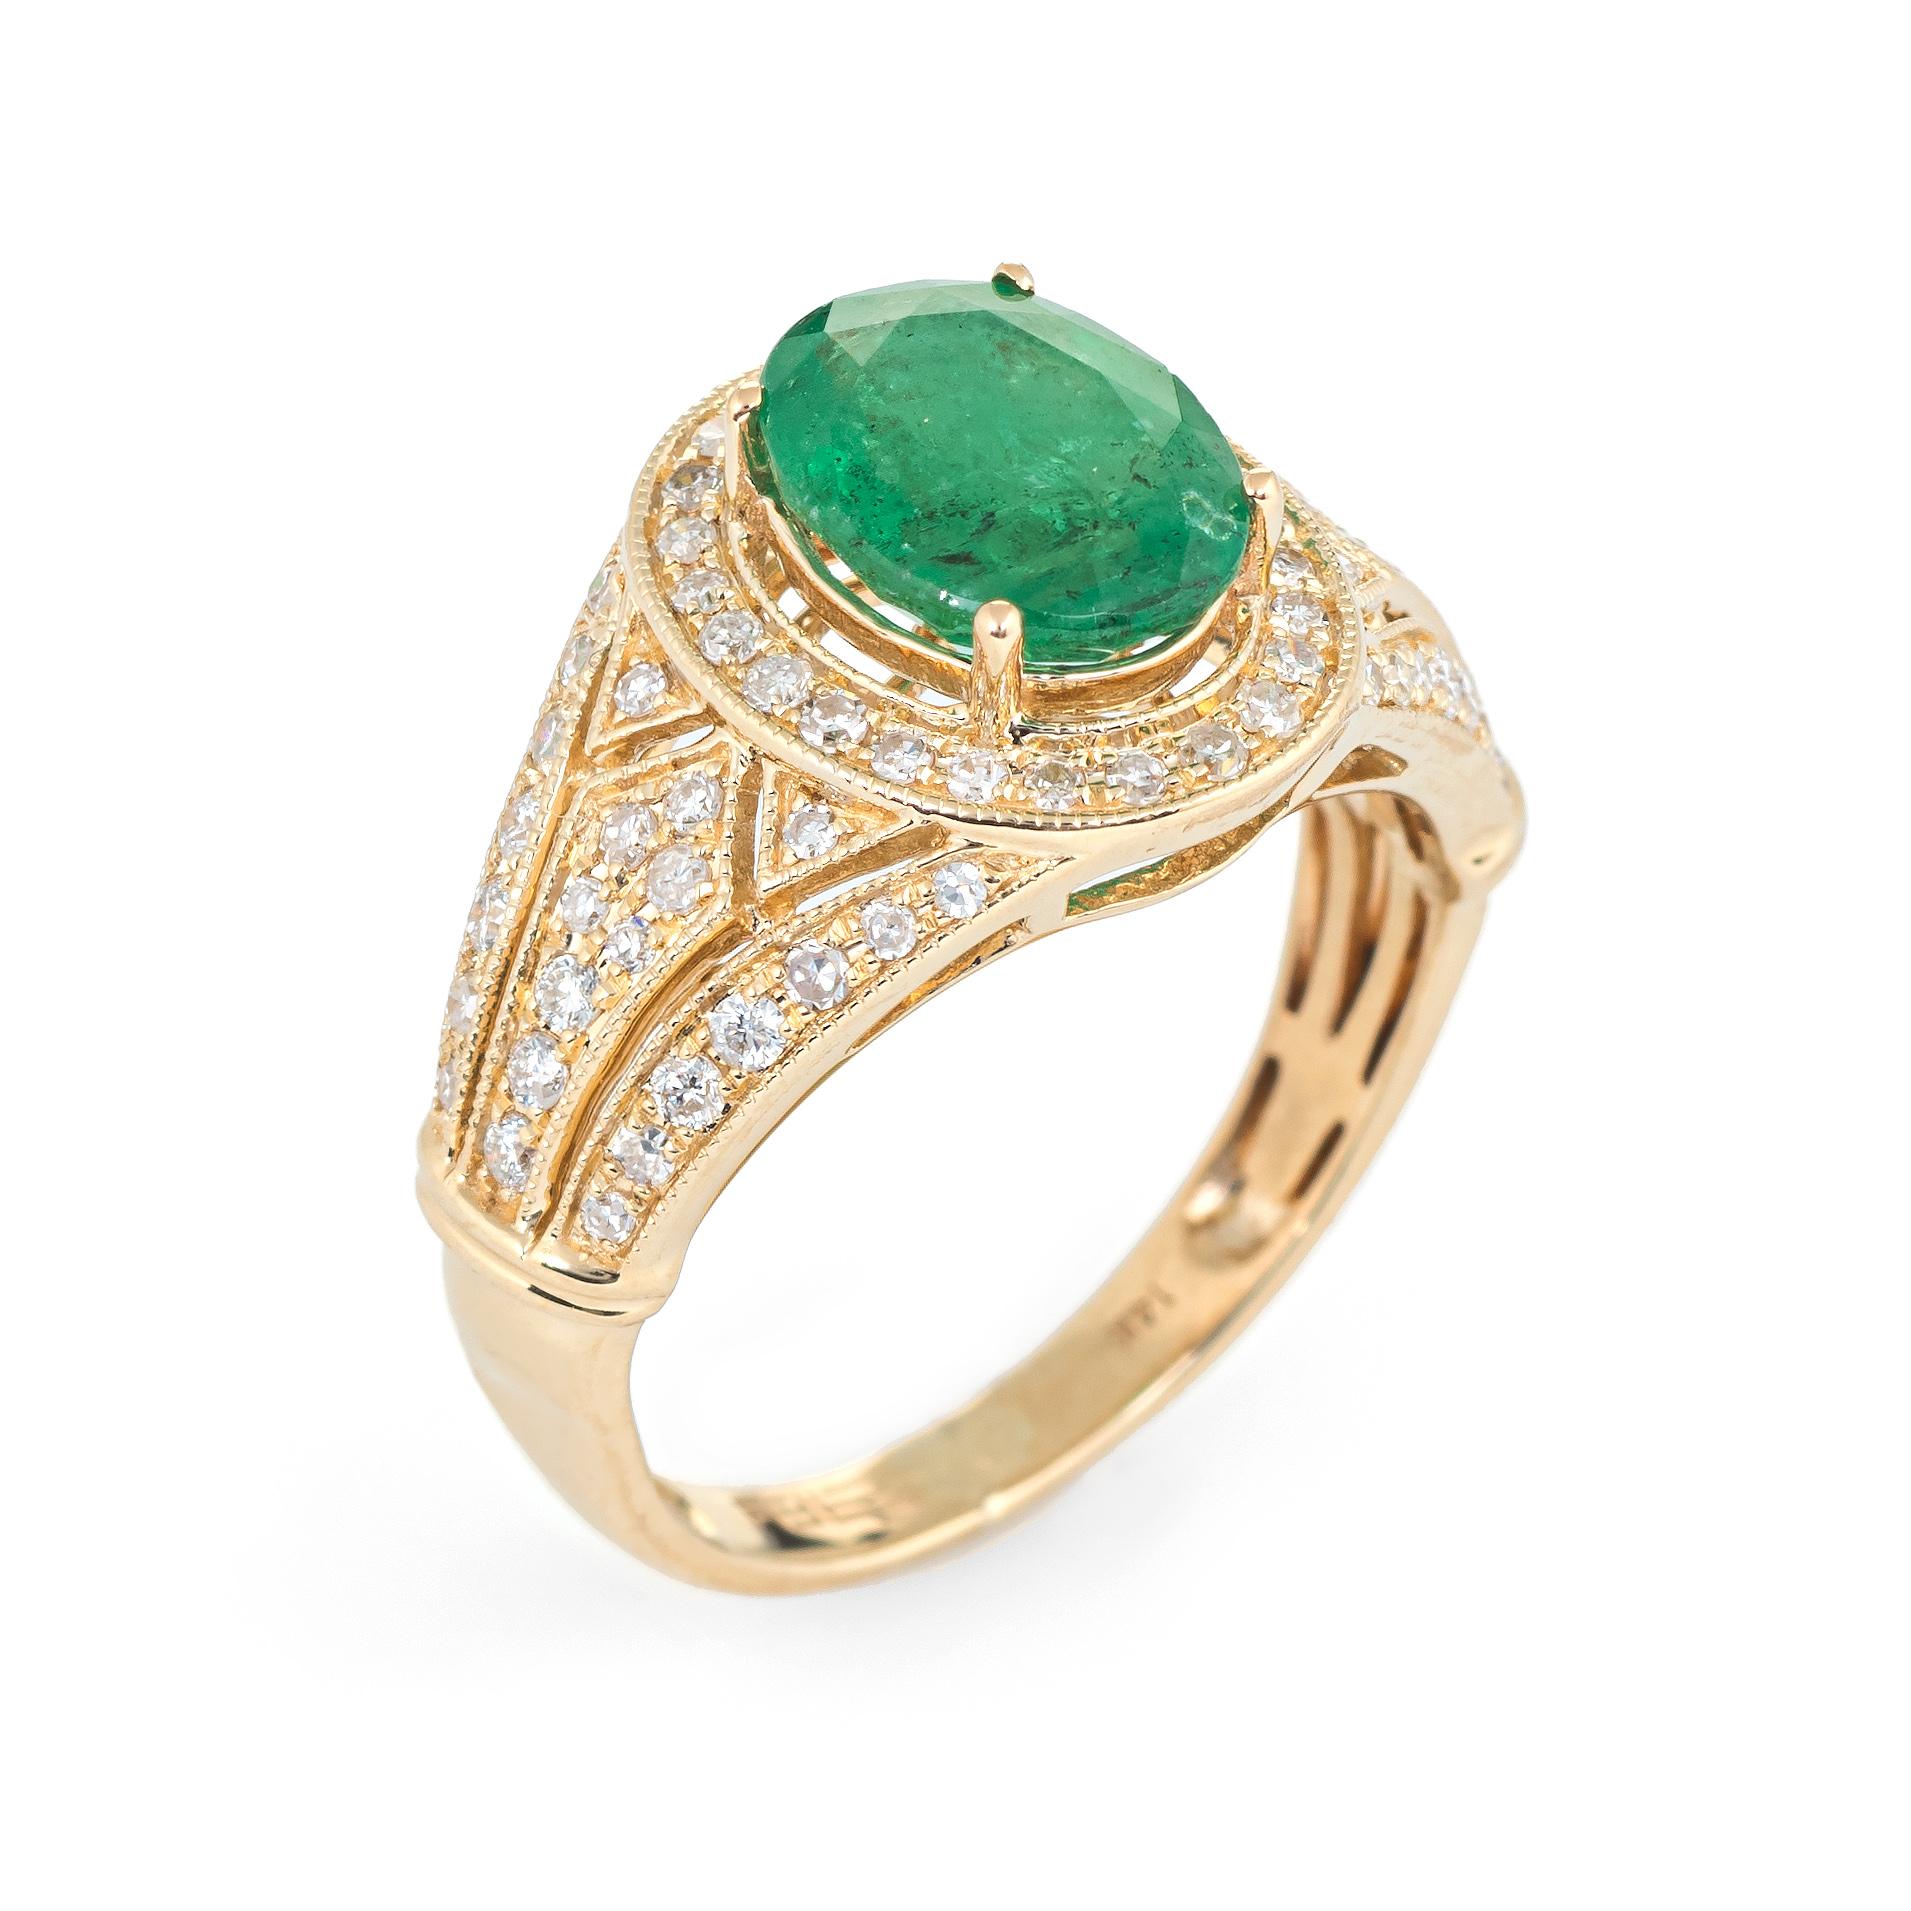 Elegant estate Effy emerald & diamond ring, crafted in 14 karat yellow gold. 

Faceted oval cut emerald measures 9mm x 7mm (estimated at 2 carats), accented with 71 estimated 0.01 single cut diamonds. The total diamond weight is estimated at 0.71